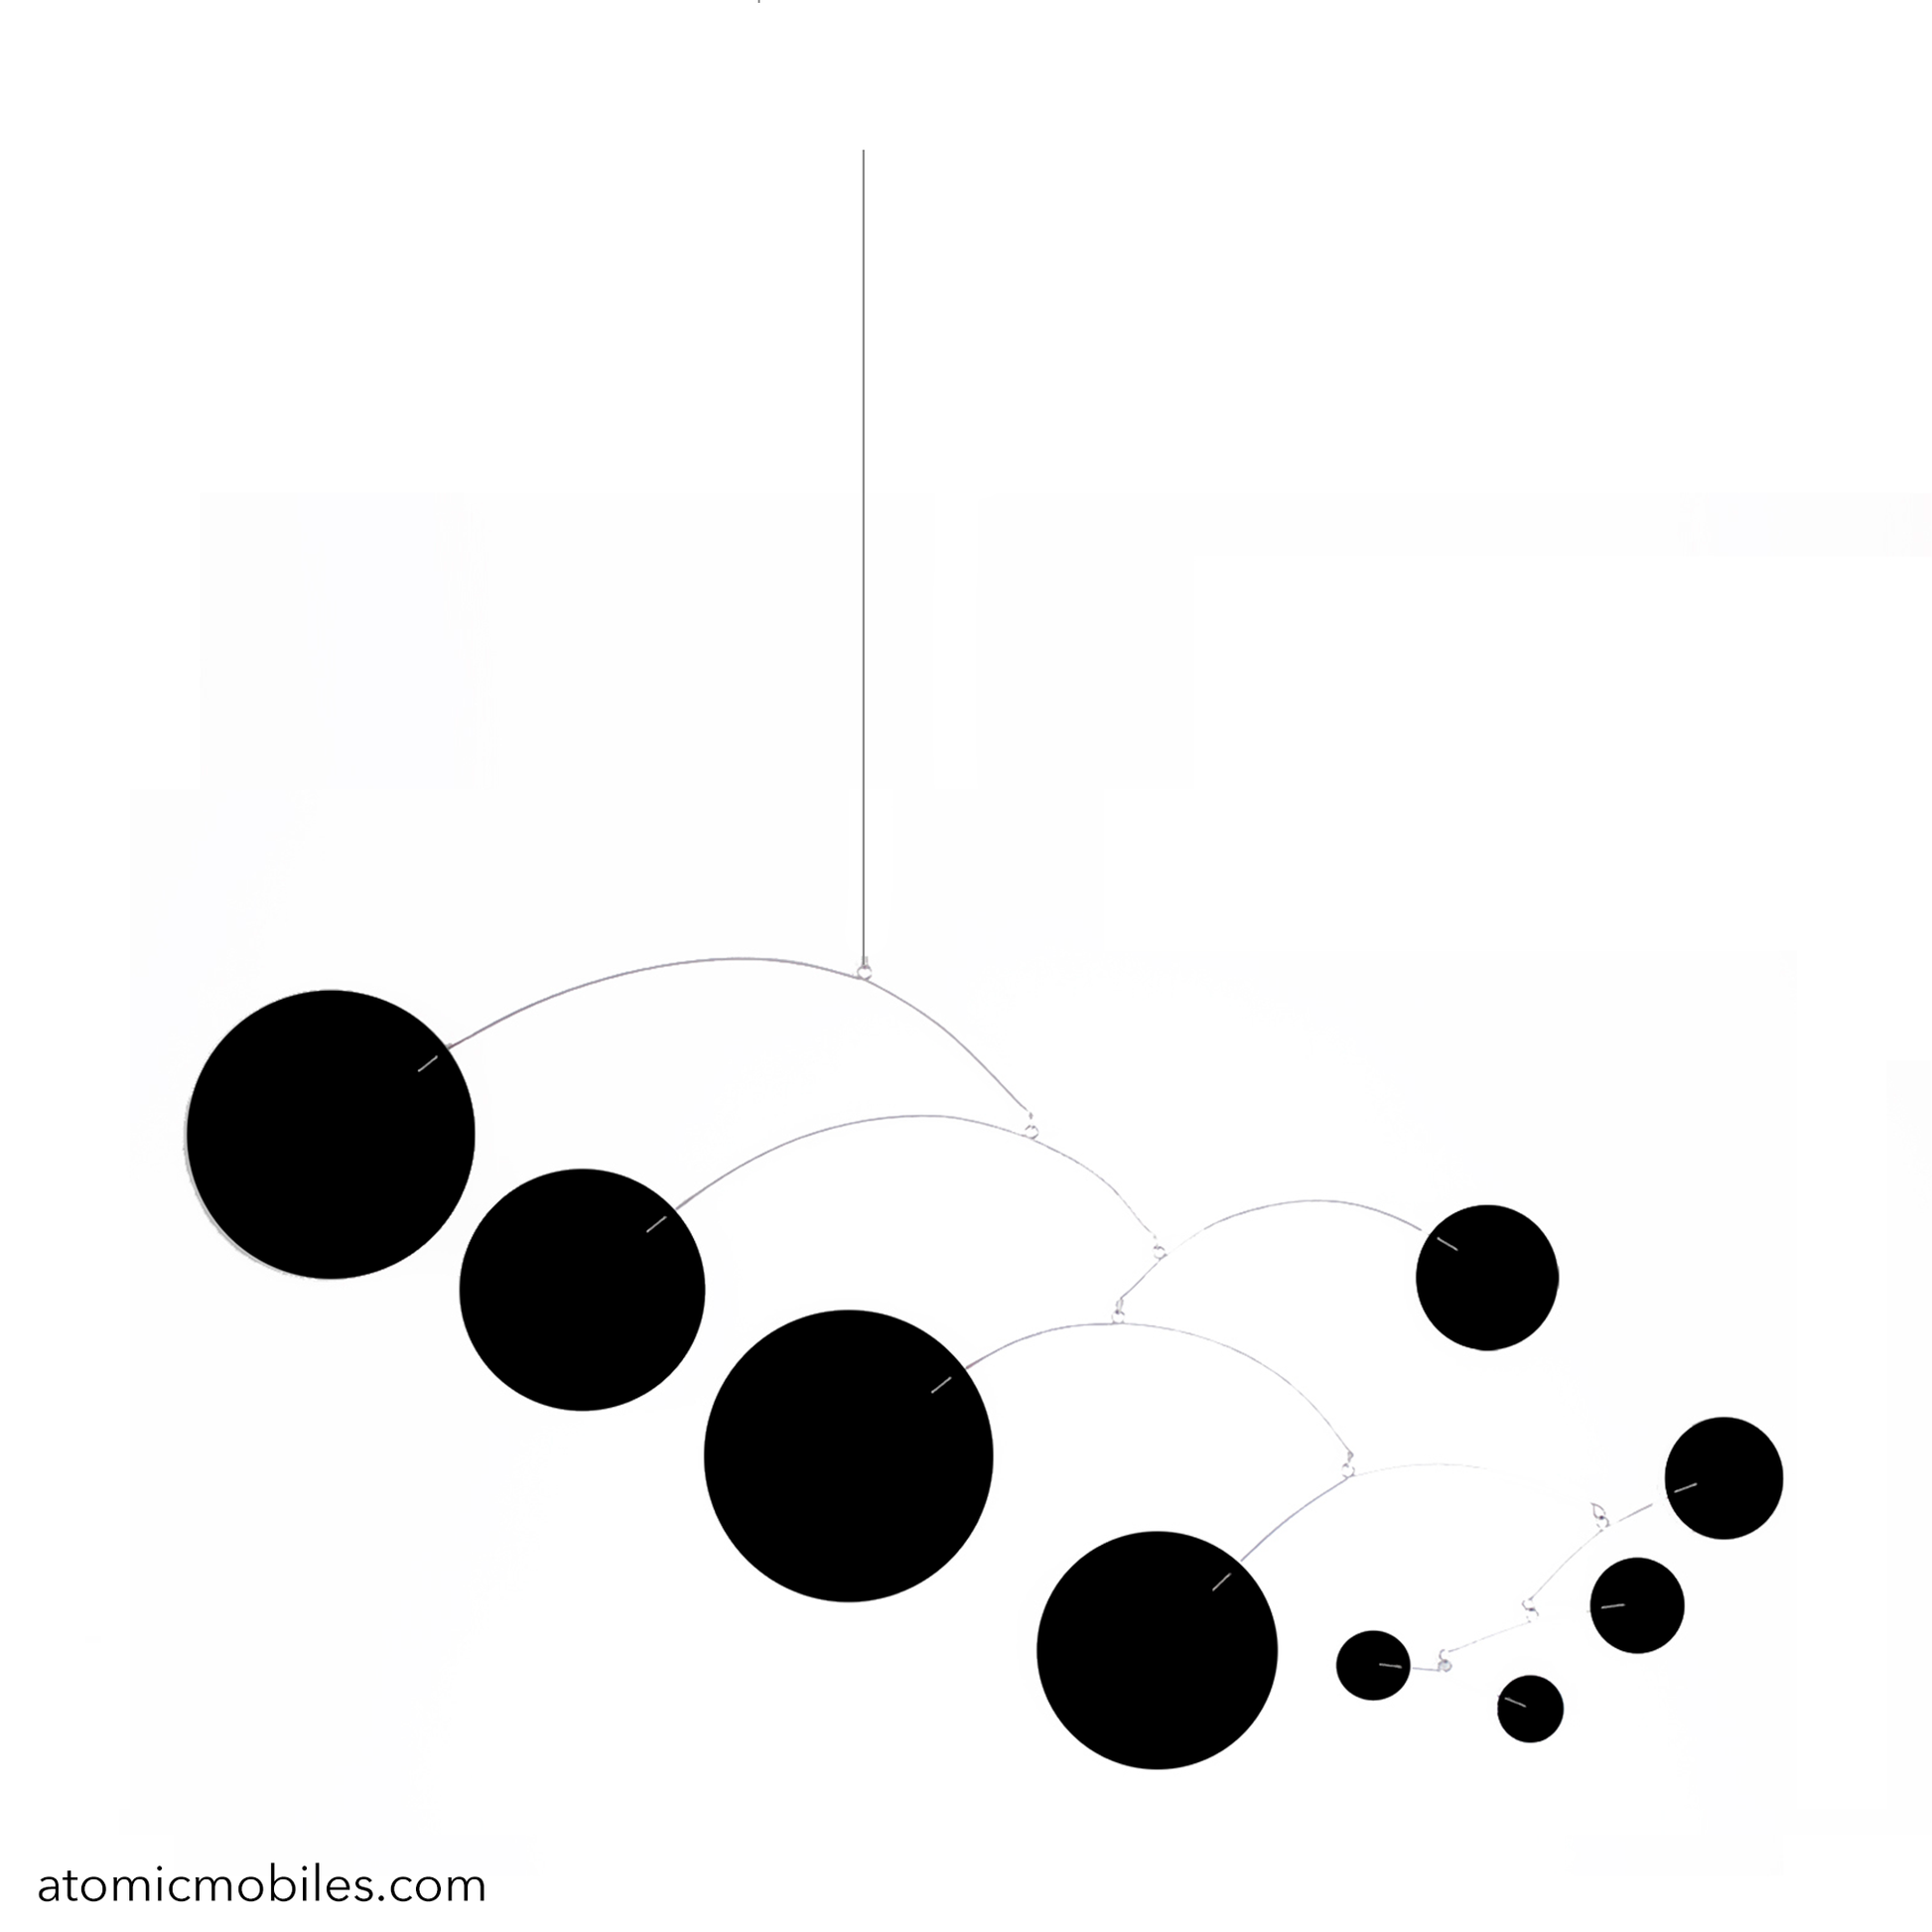 MOD Mobile with big circles in all Black - groovy mid century modern style kinetic art mobiles by AtomicMobiles.com